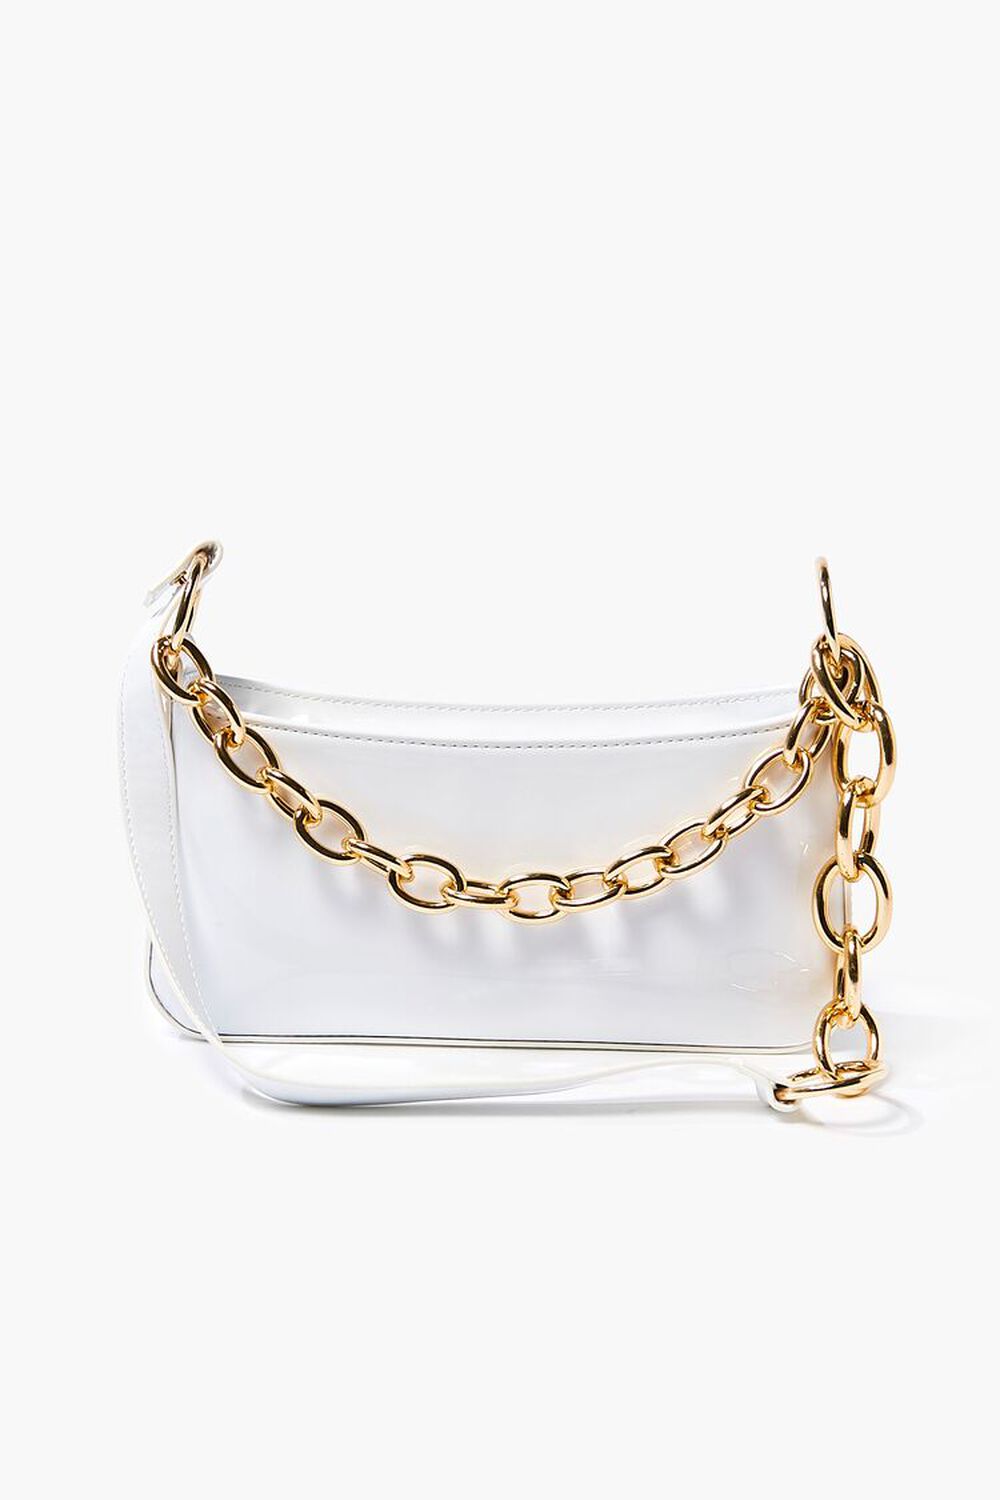 WHITE Faux Leather Chain Shoulder Bag, image 1